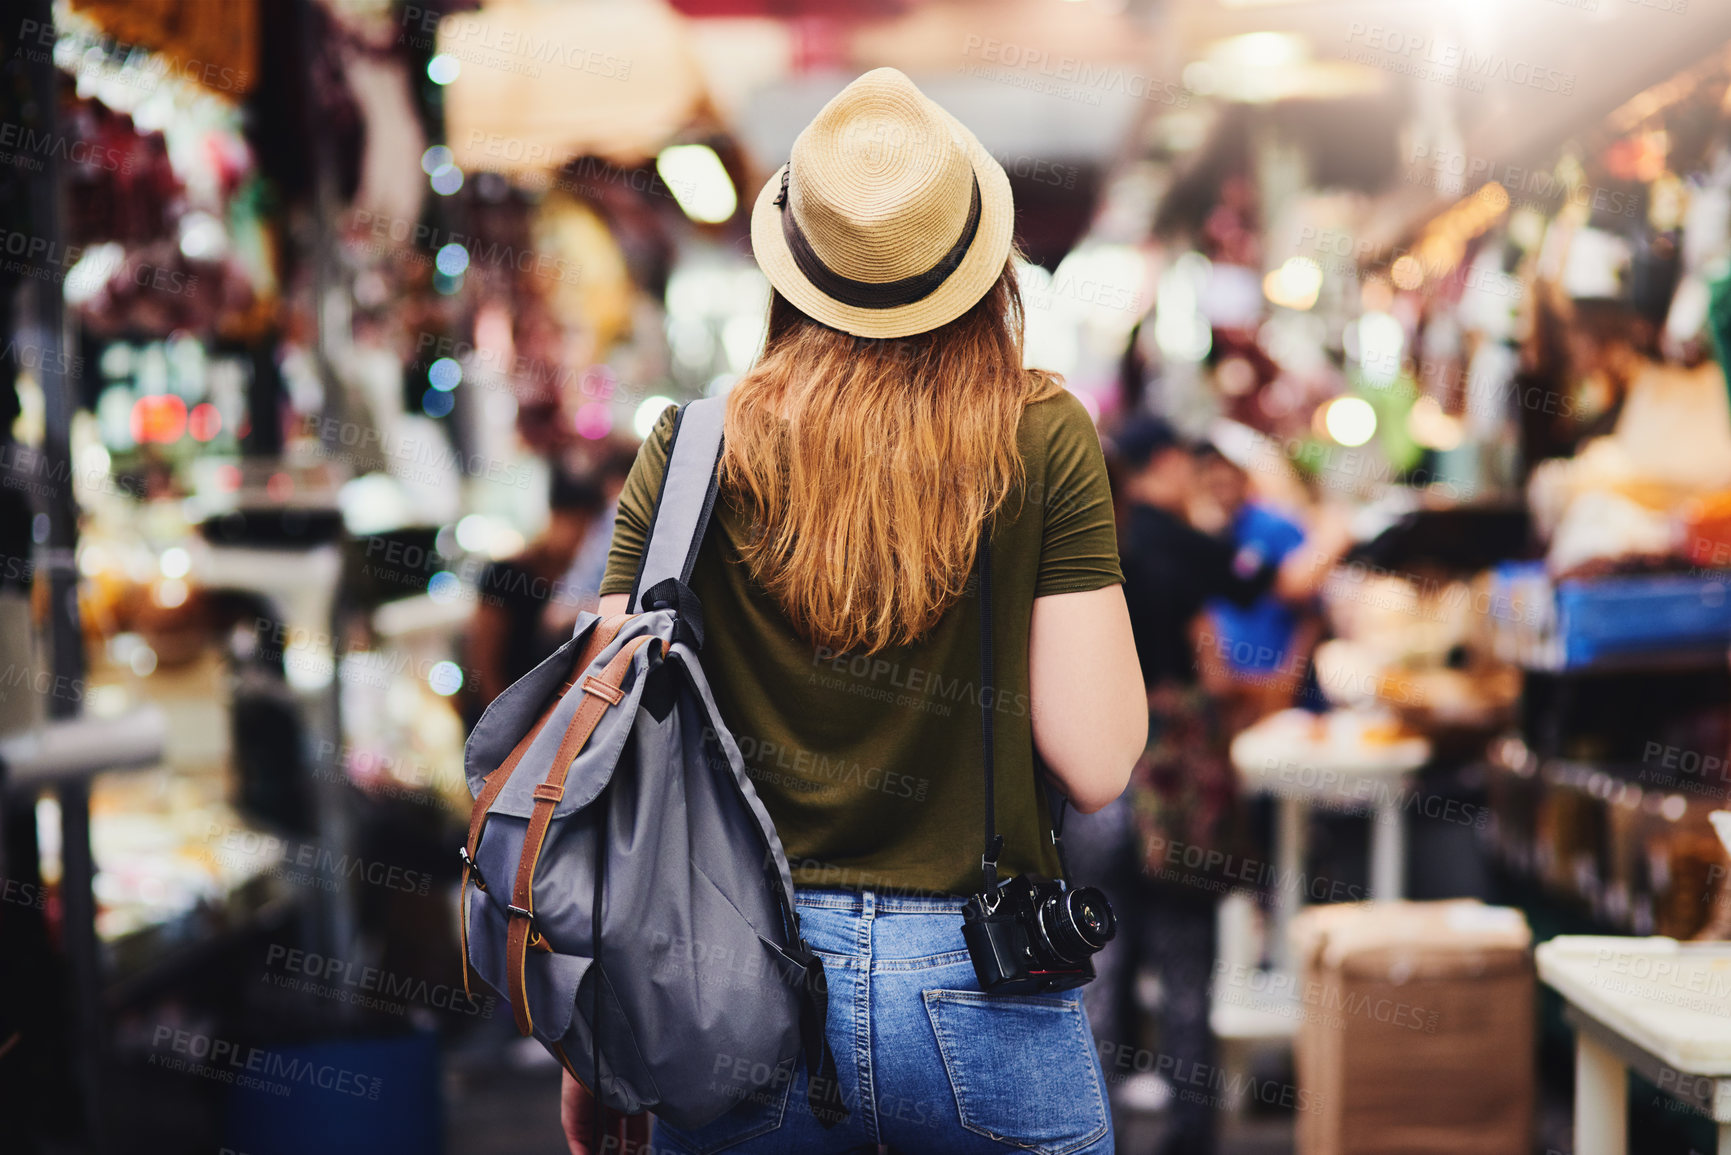 Buy stock photo Rearview shot of an unrecognizable woman wearing a hat and walking through a busy market outside during the day